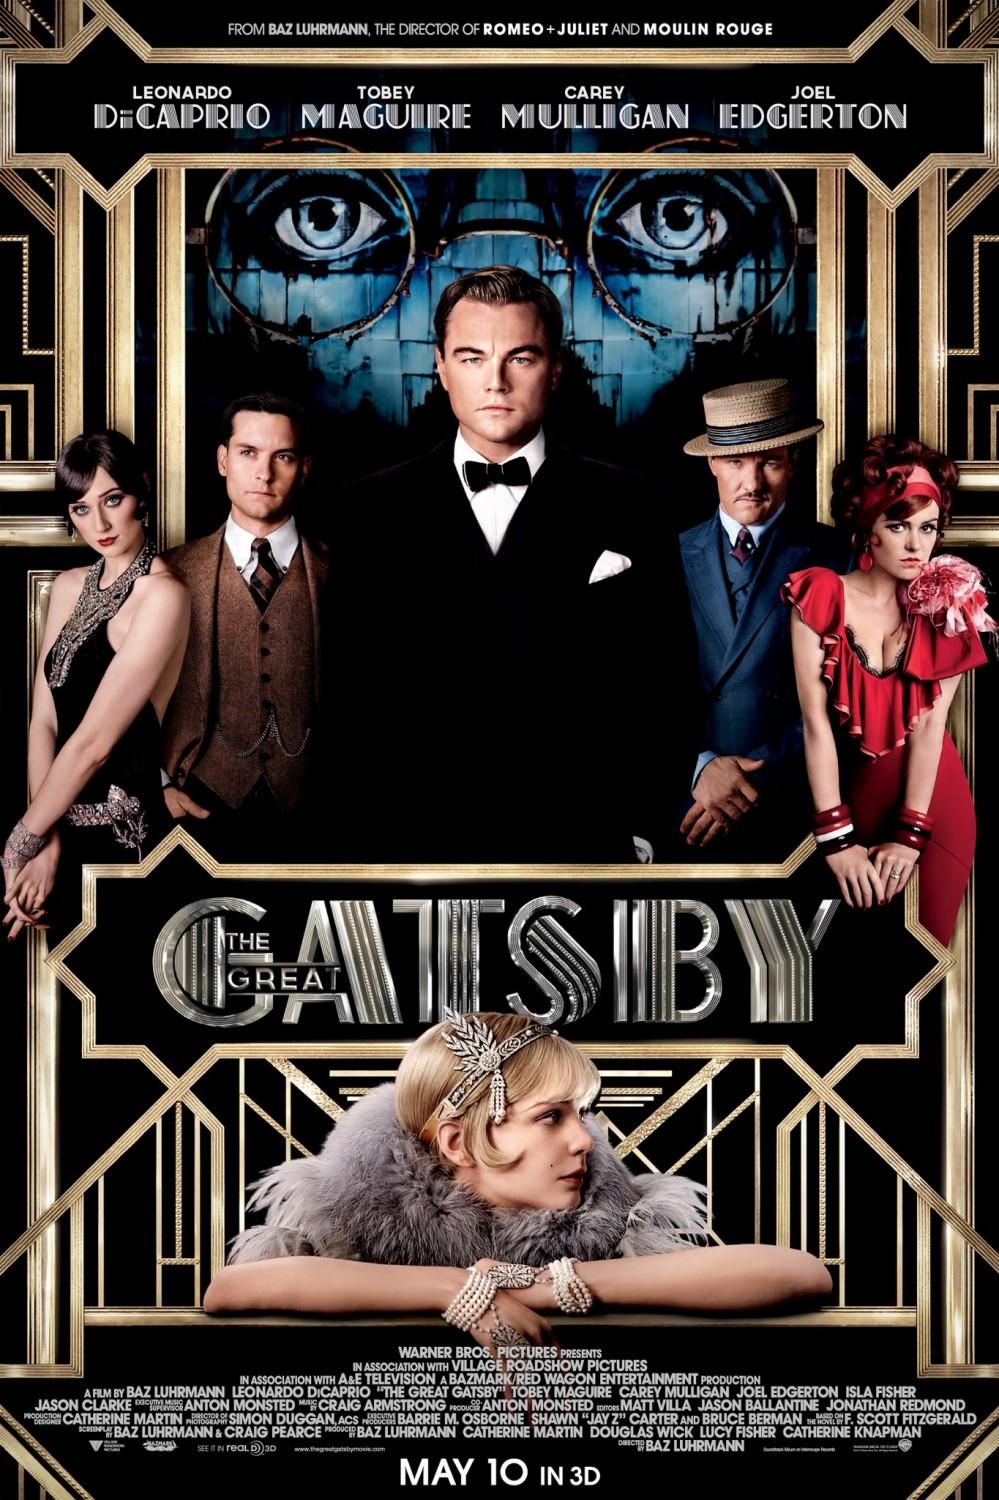 http://collider.com/wp-content/uploads/the-great-gatsby-poster1.jpg